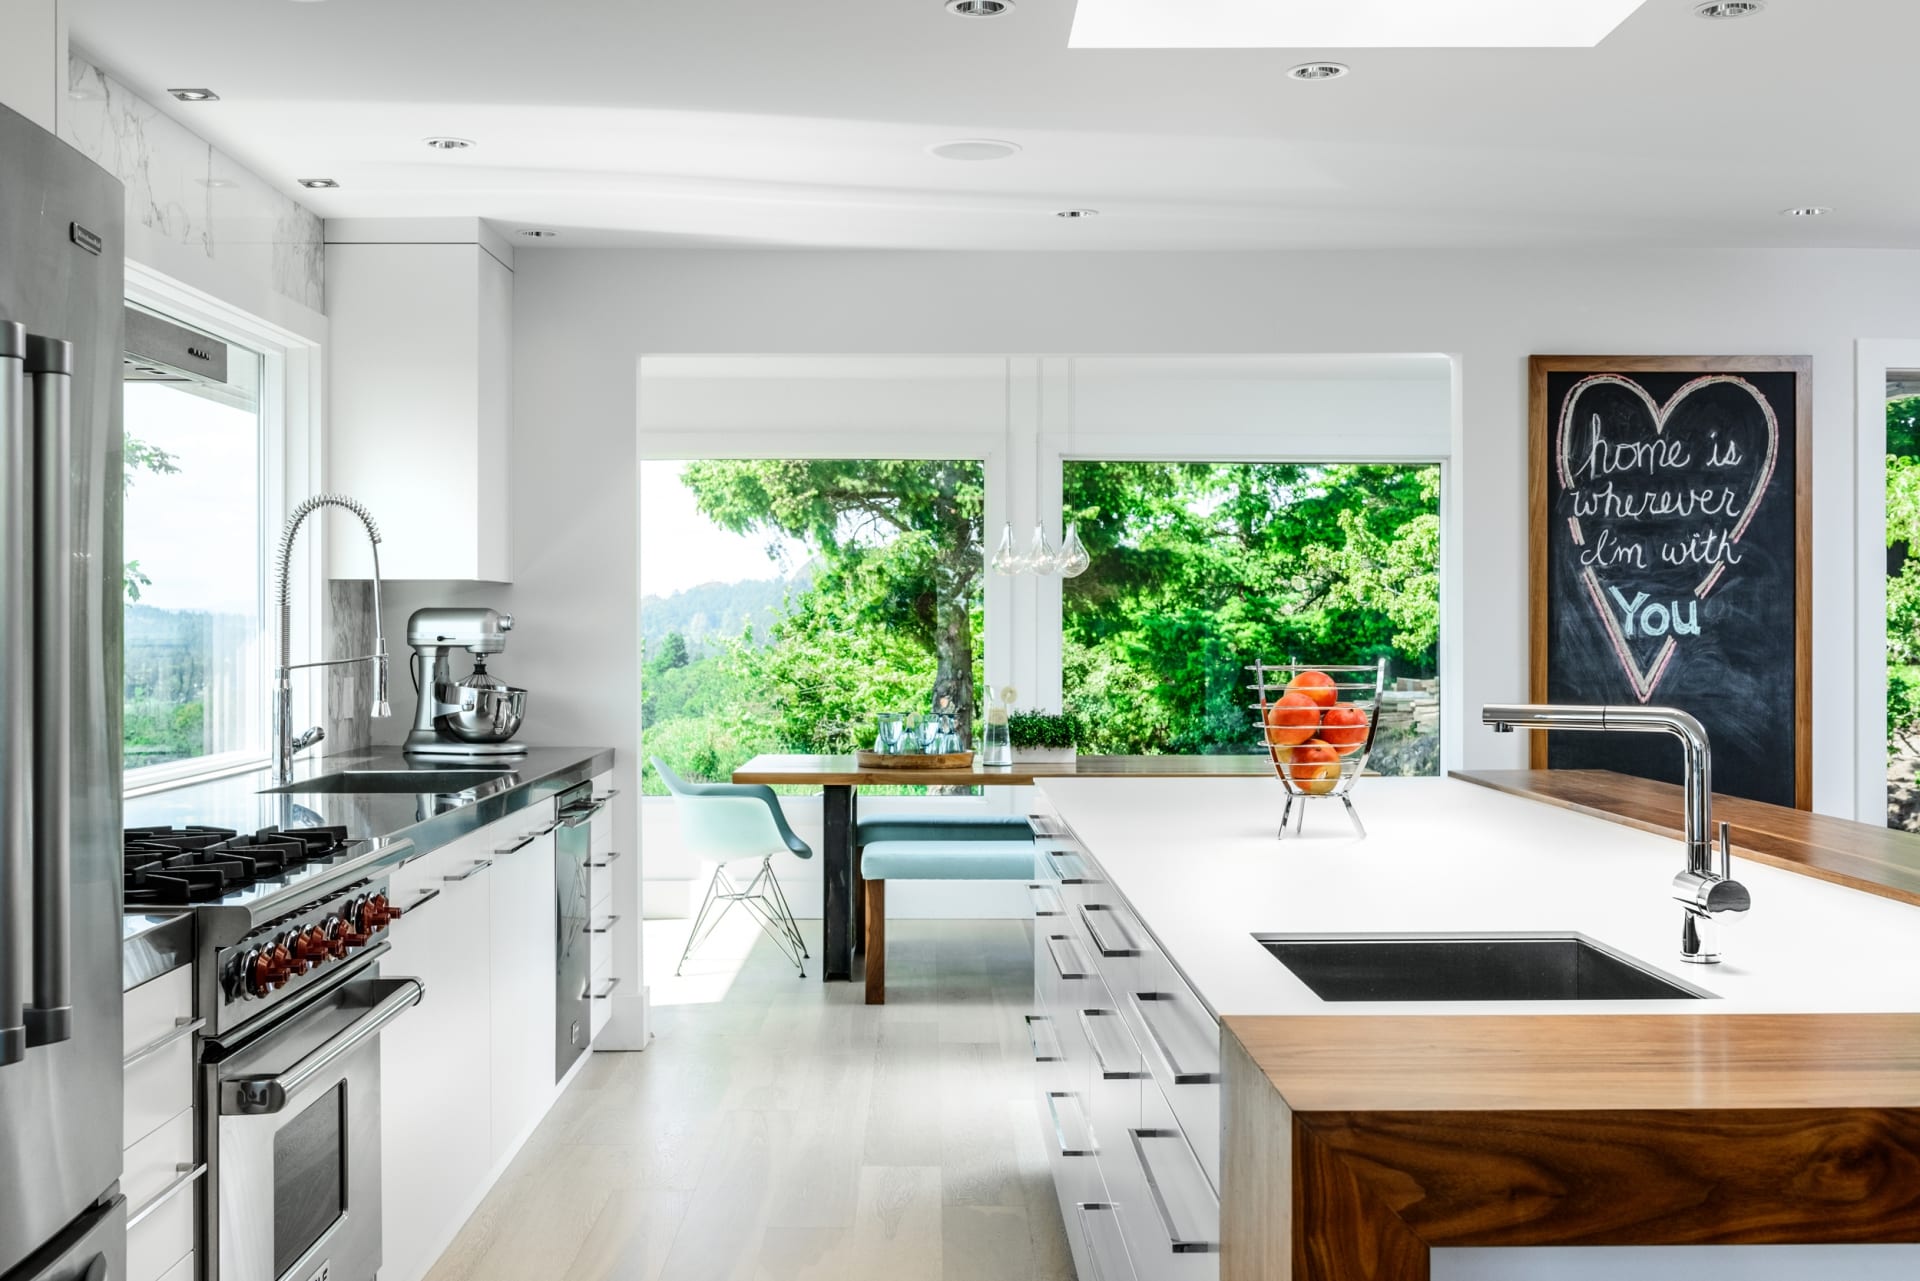 Neolith Artic White aanrechtblad